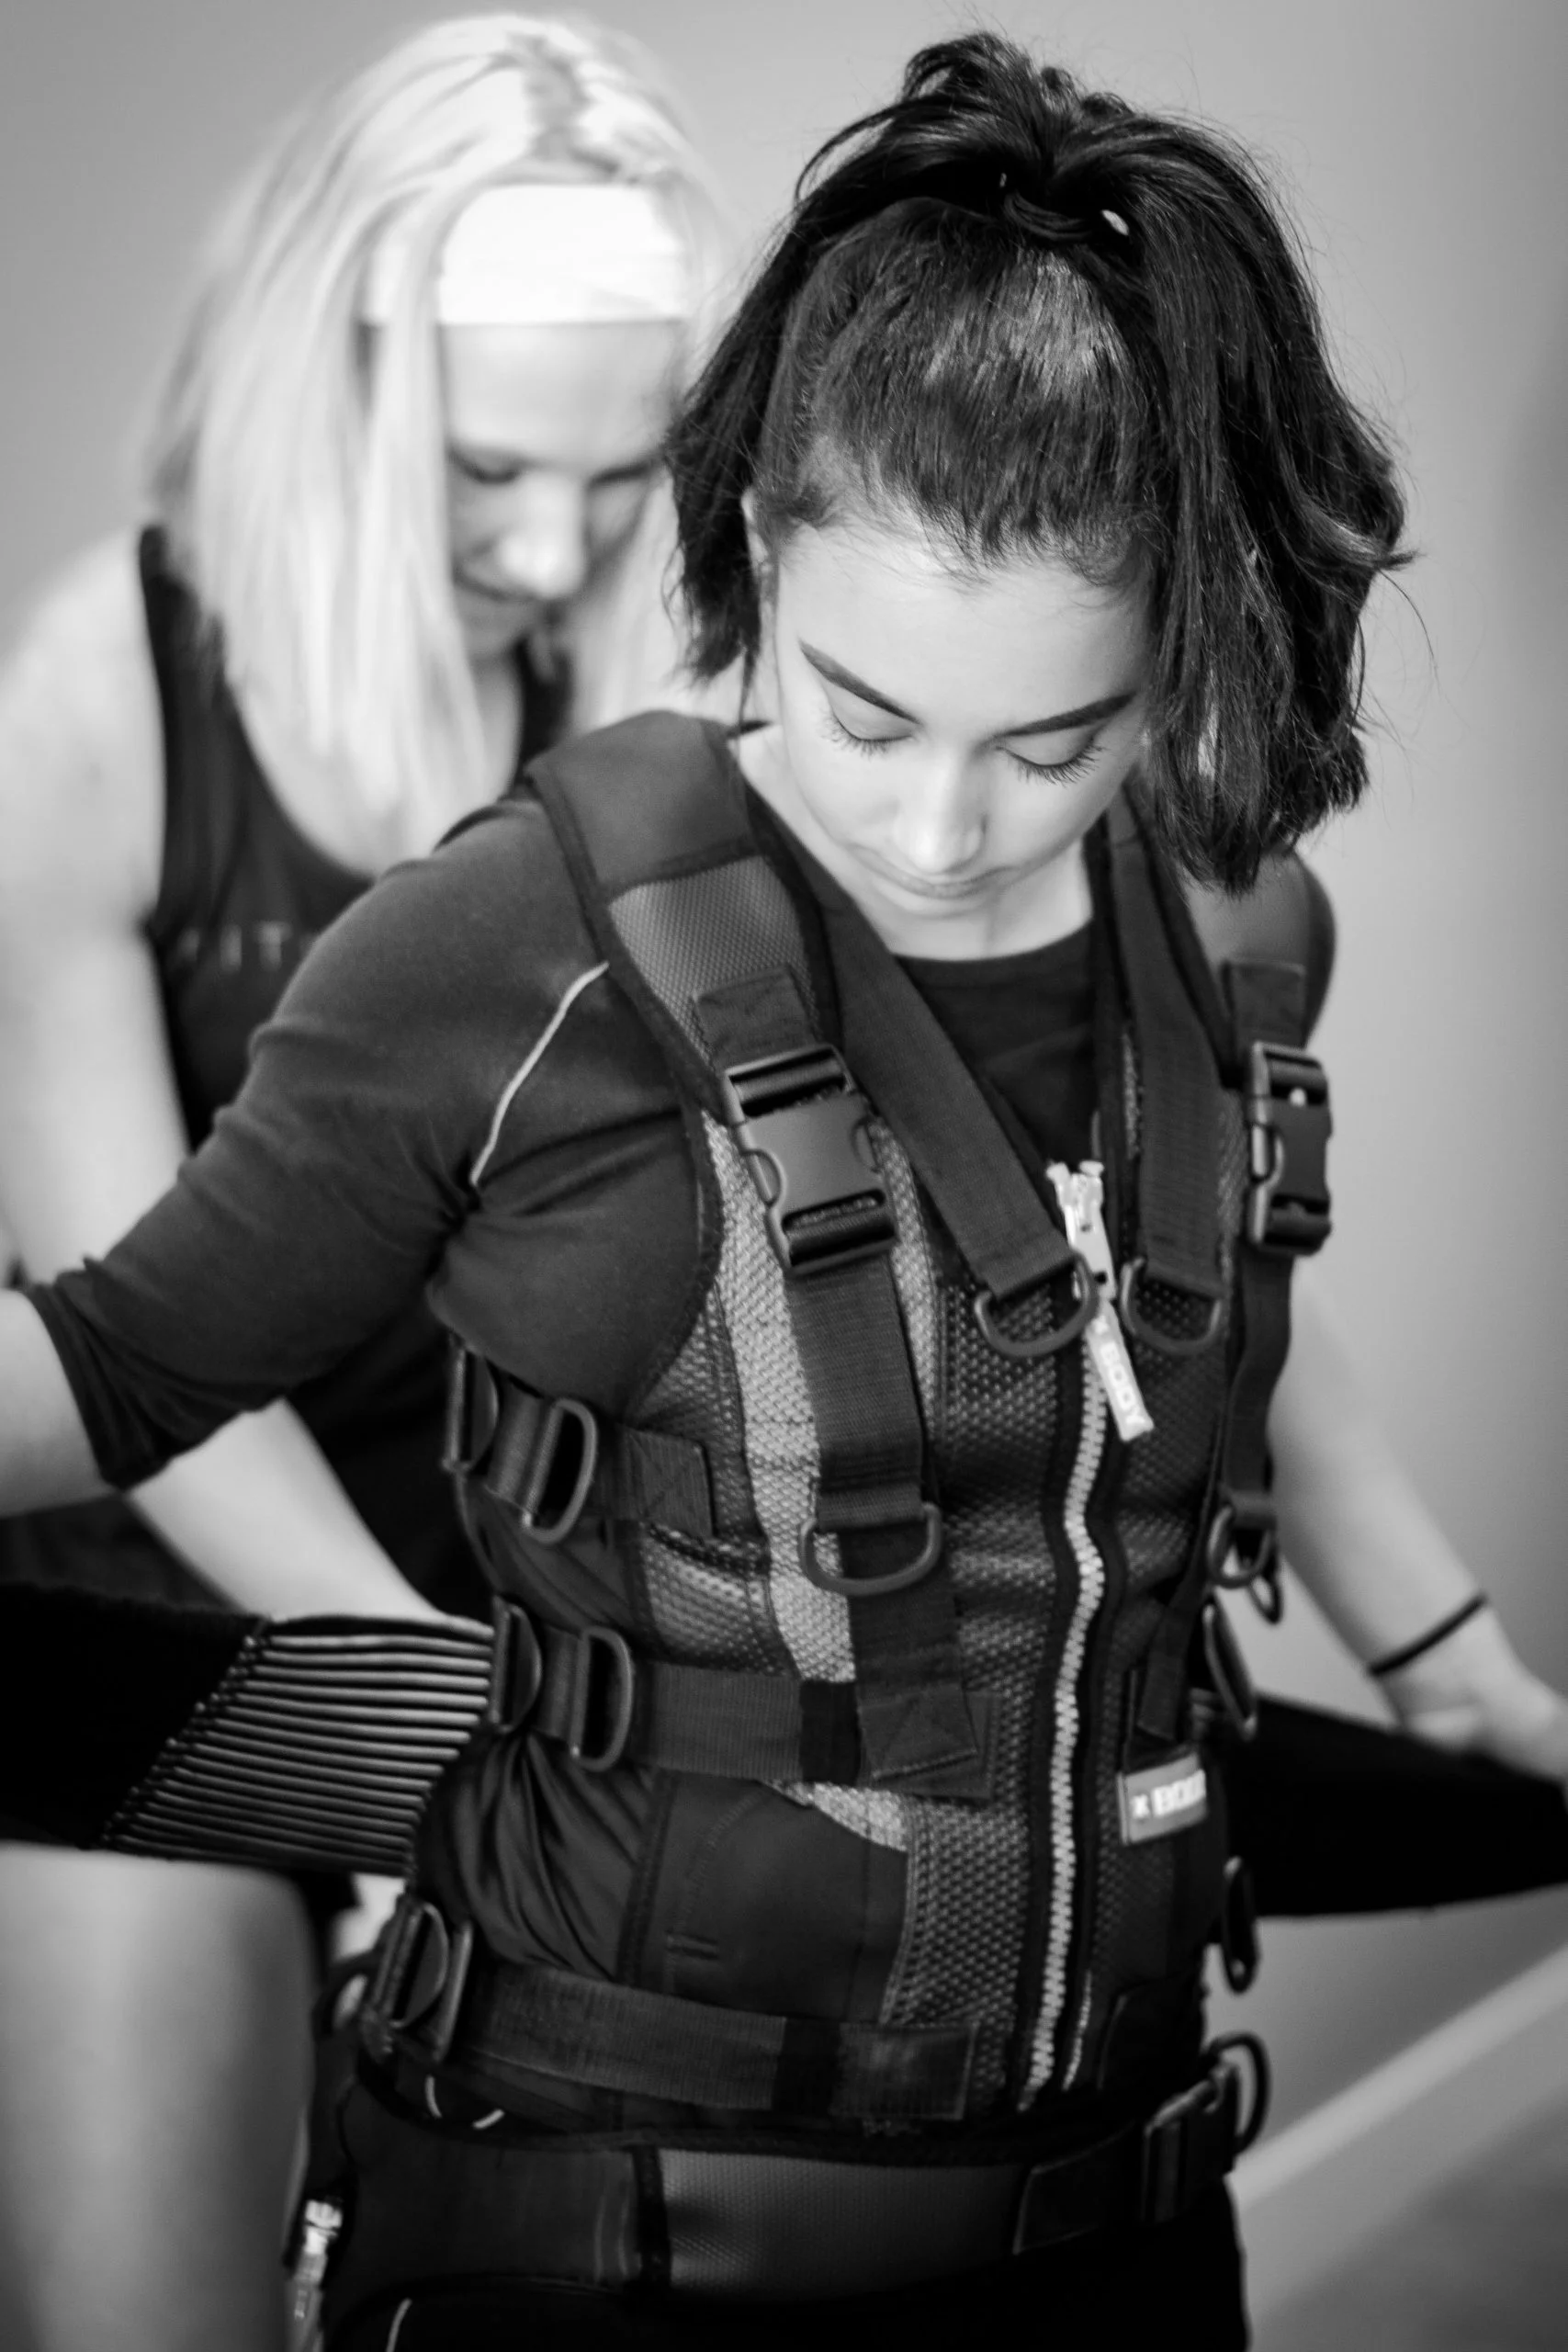 How electric muscle stimulation (EMS) is used for rehabilitation